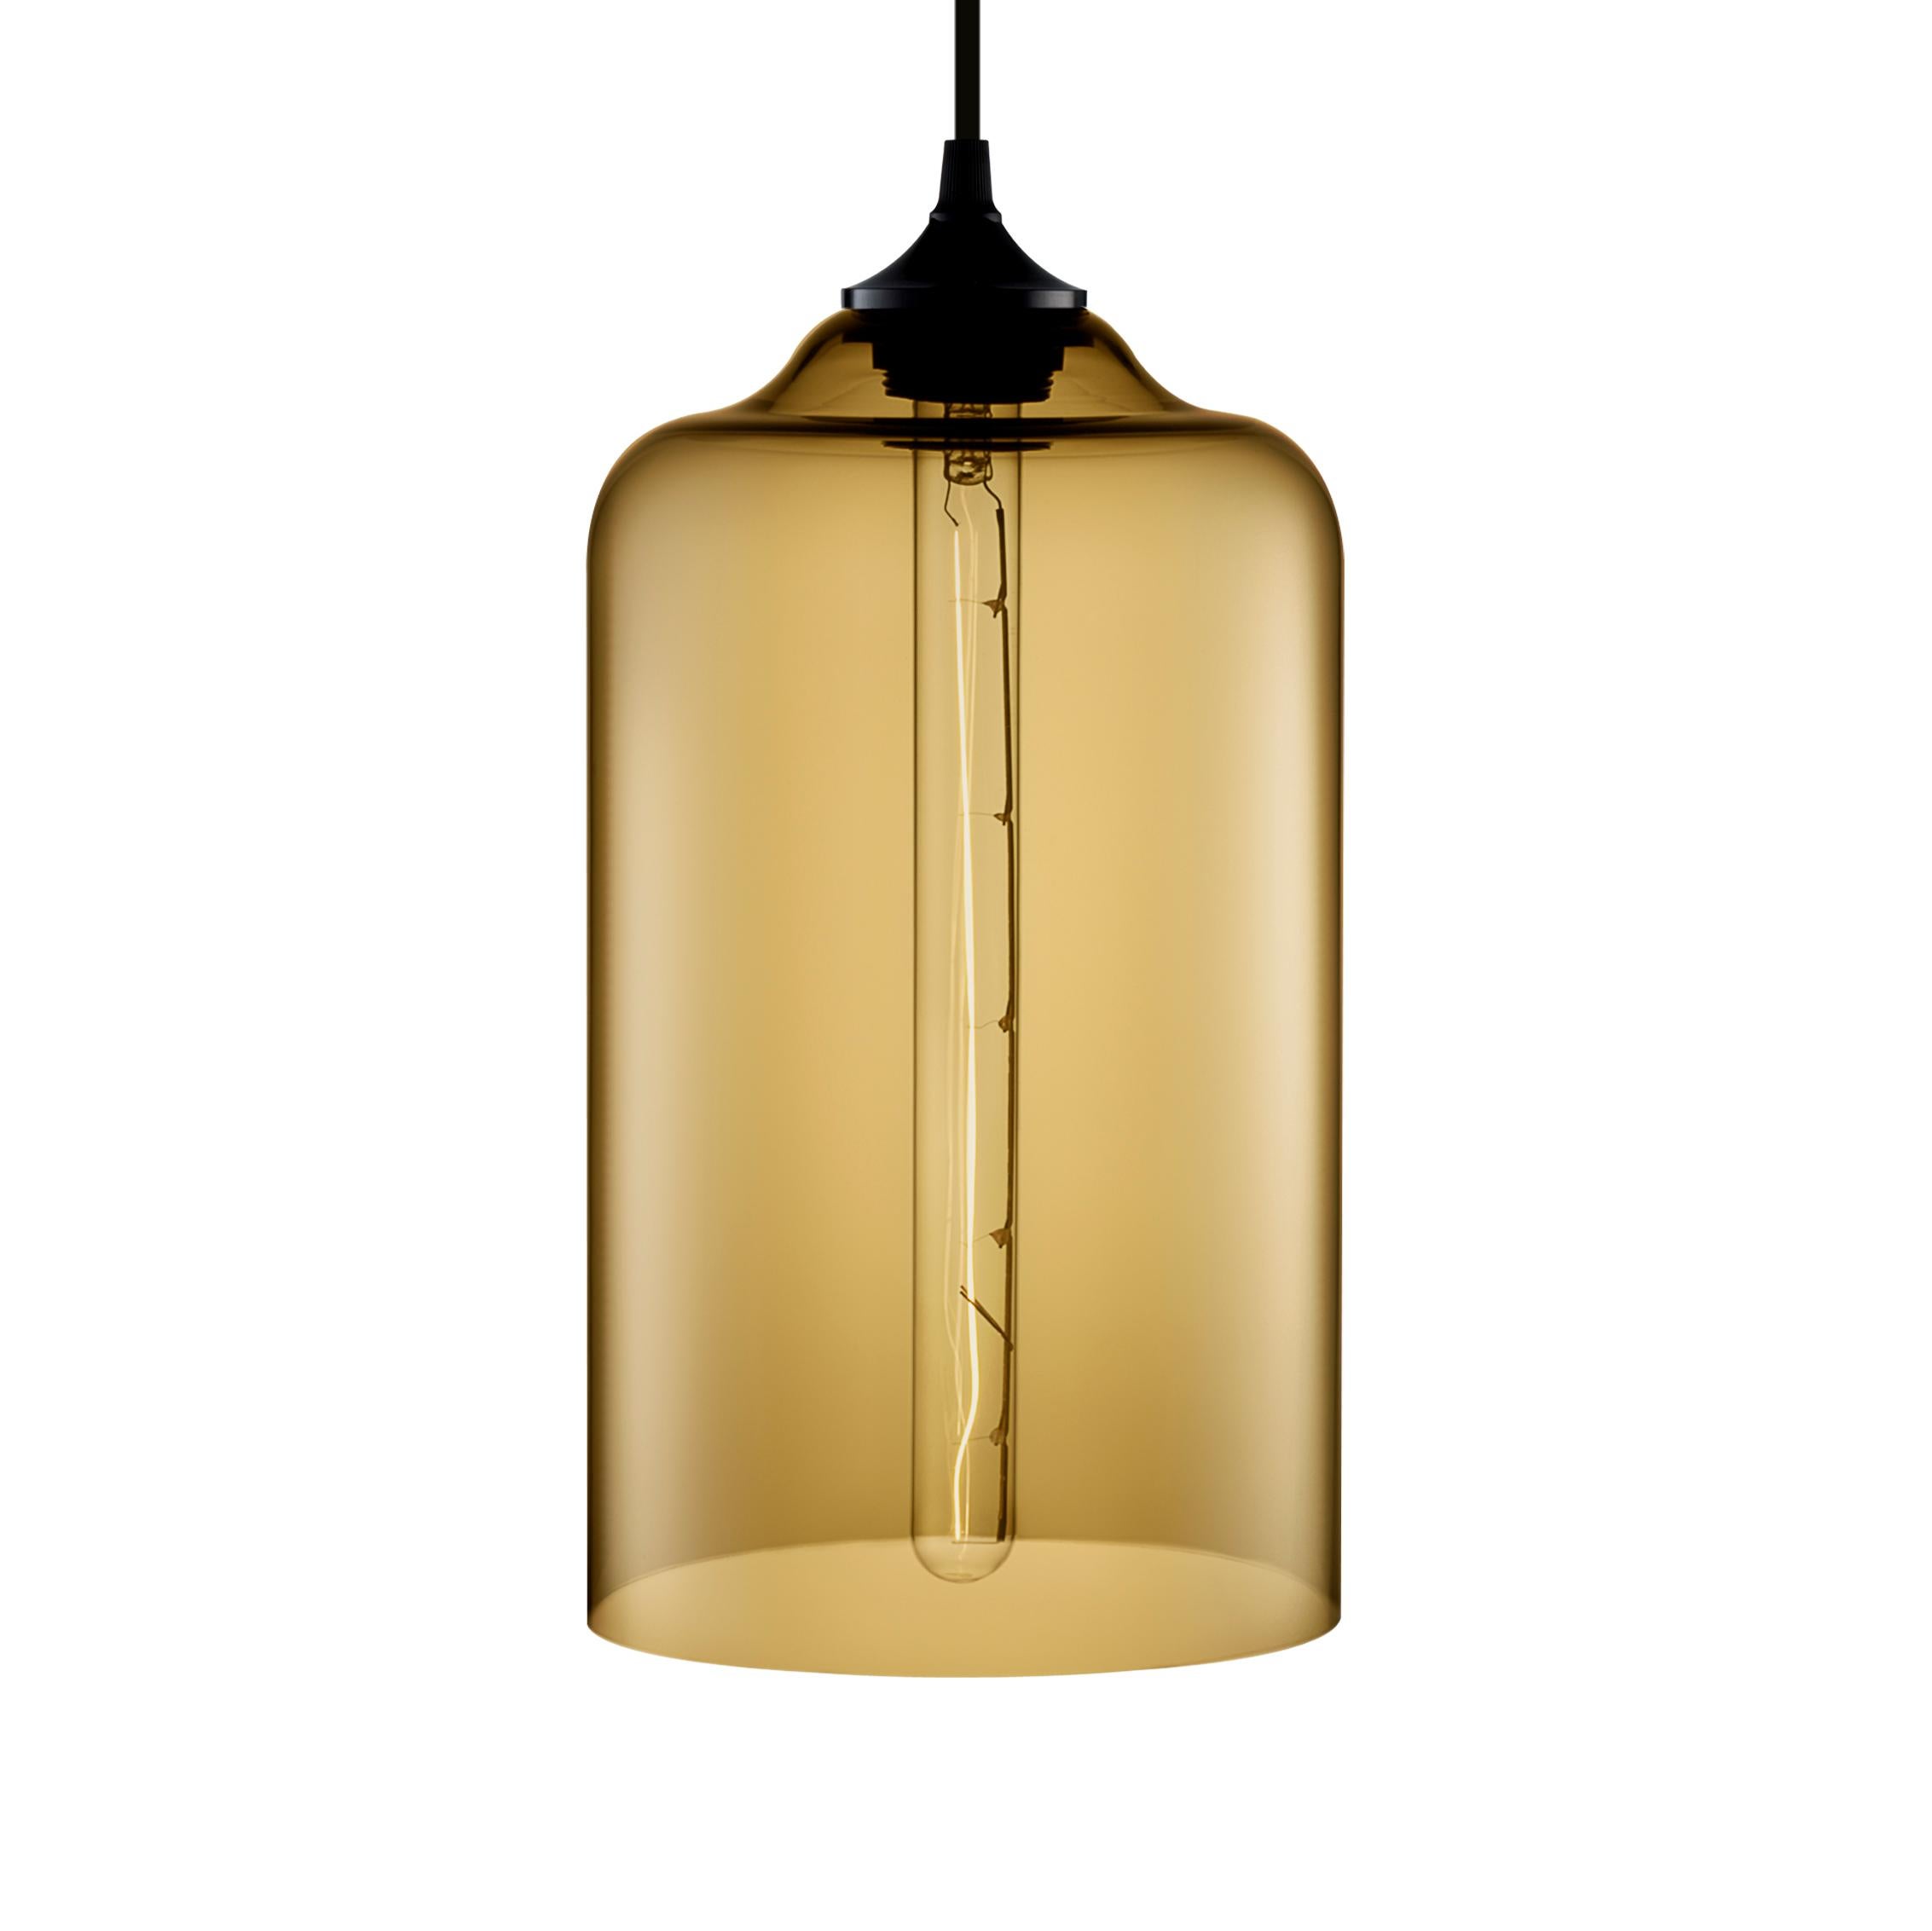 Celebrating iconic design, the bell jar and its sleeker companion, the Bella, cast glorious beams of light that are as warm as they are welcoming. Every single glass pendant light that comes from Niche is handblown by real human beings in a